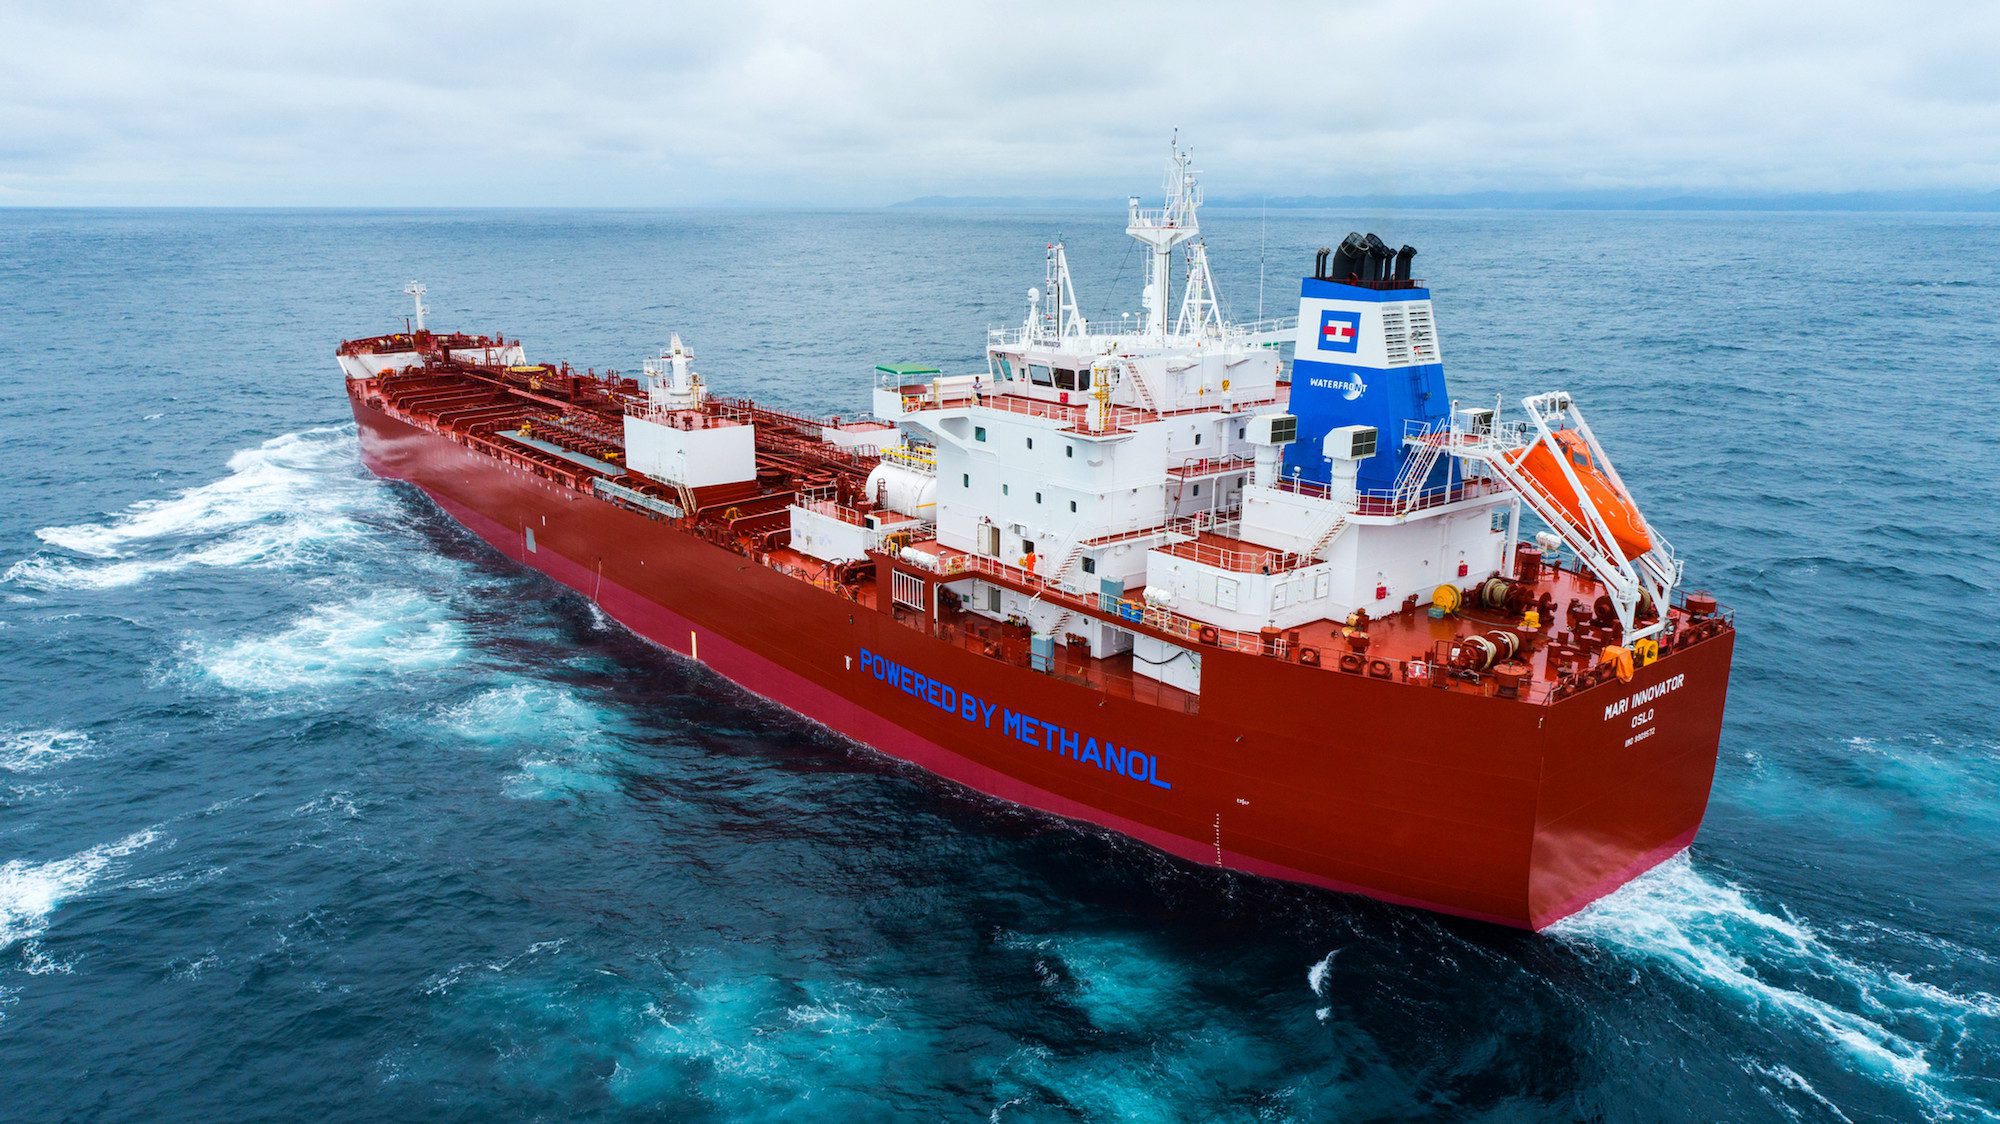 Clean Sea Transport Acquires Marinvest’s Fleet of Methanol-Fueled and Ice Class Tankers